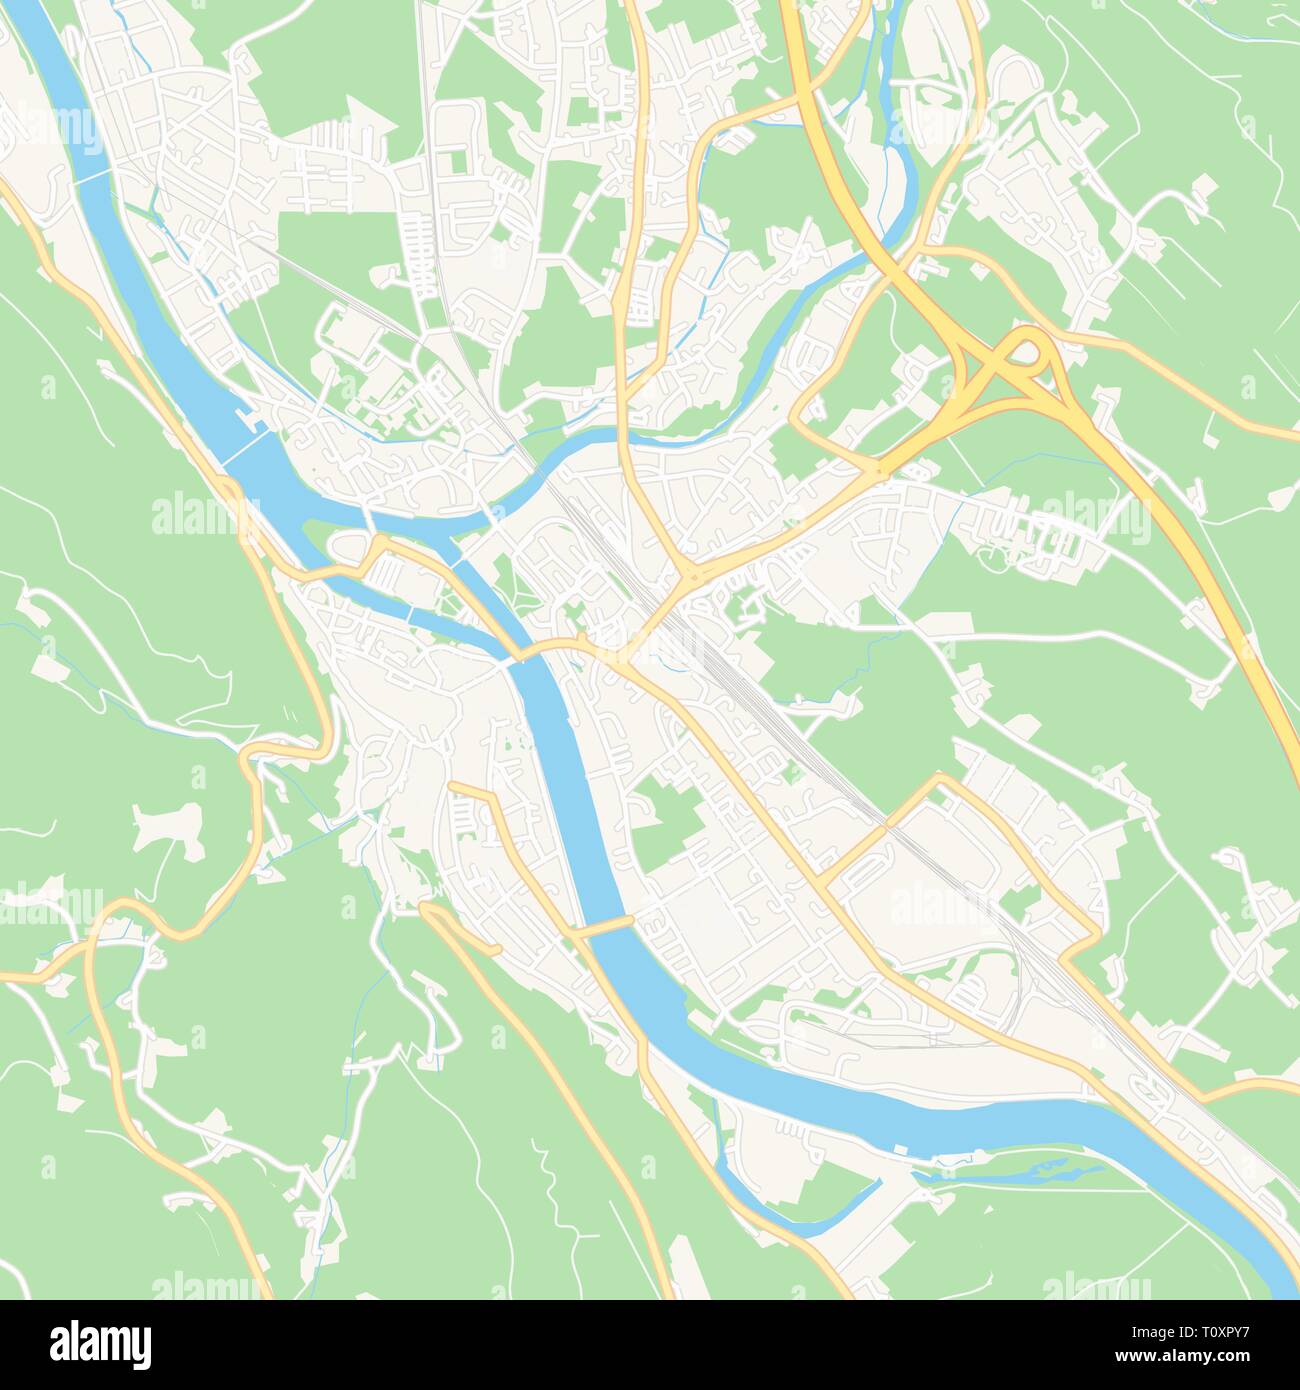 Printable map of Hallein, Austria with main and secondary roads and larger railways. This map is carefully designed for routing and placing individual Stock Vector